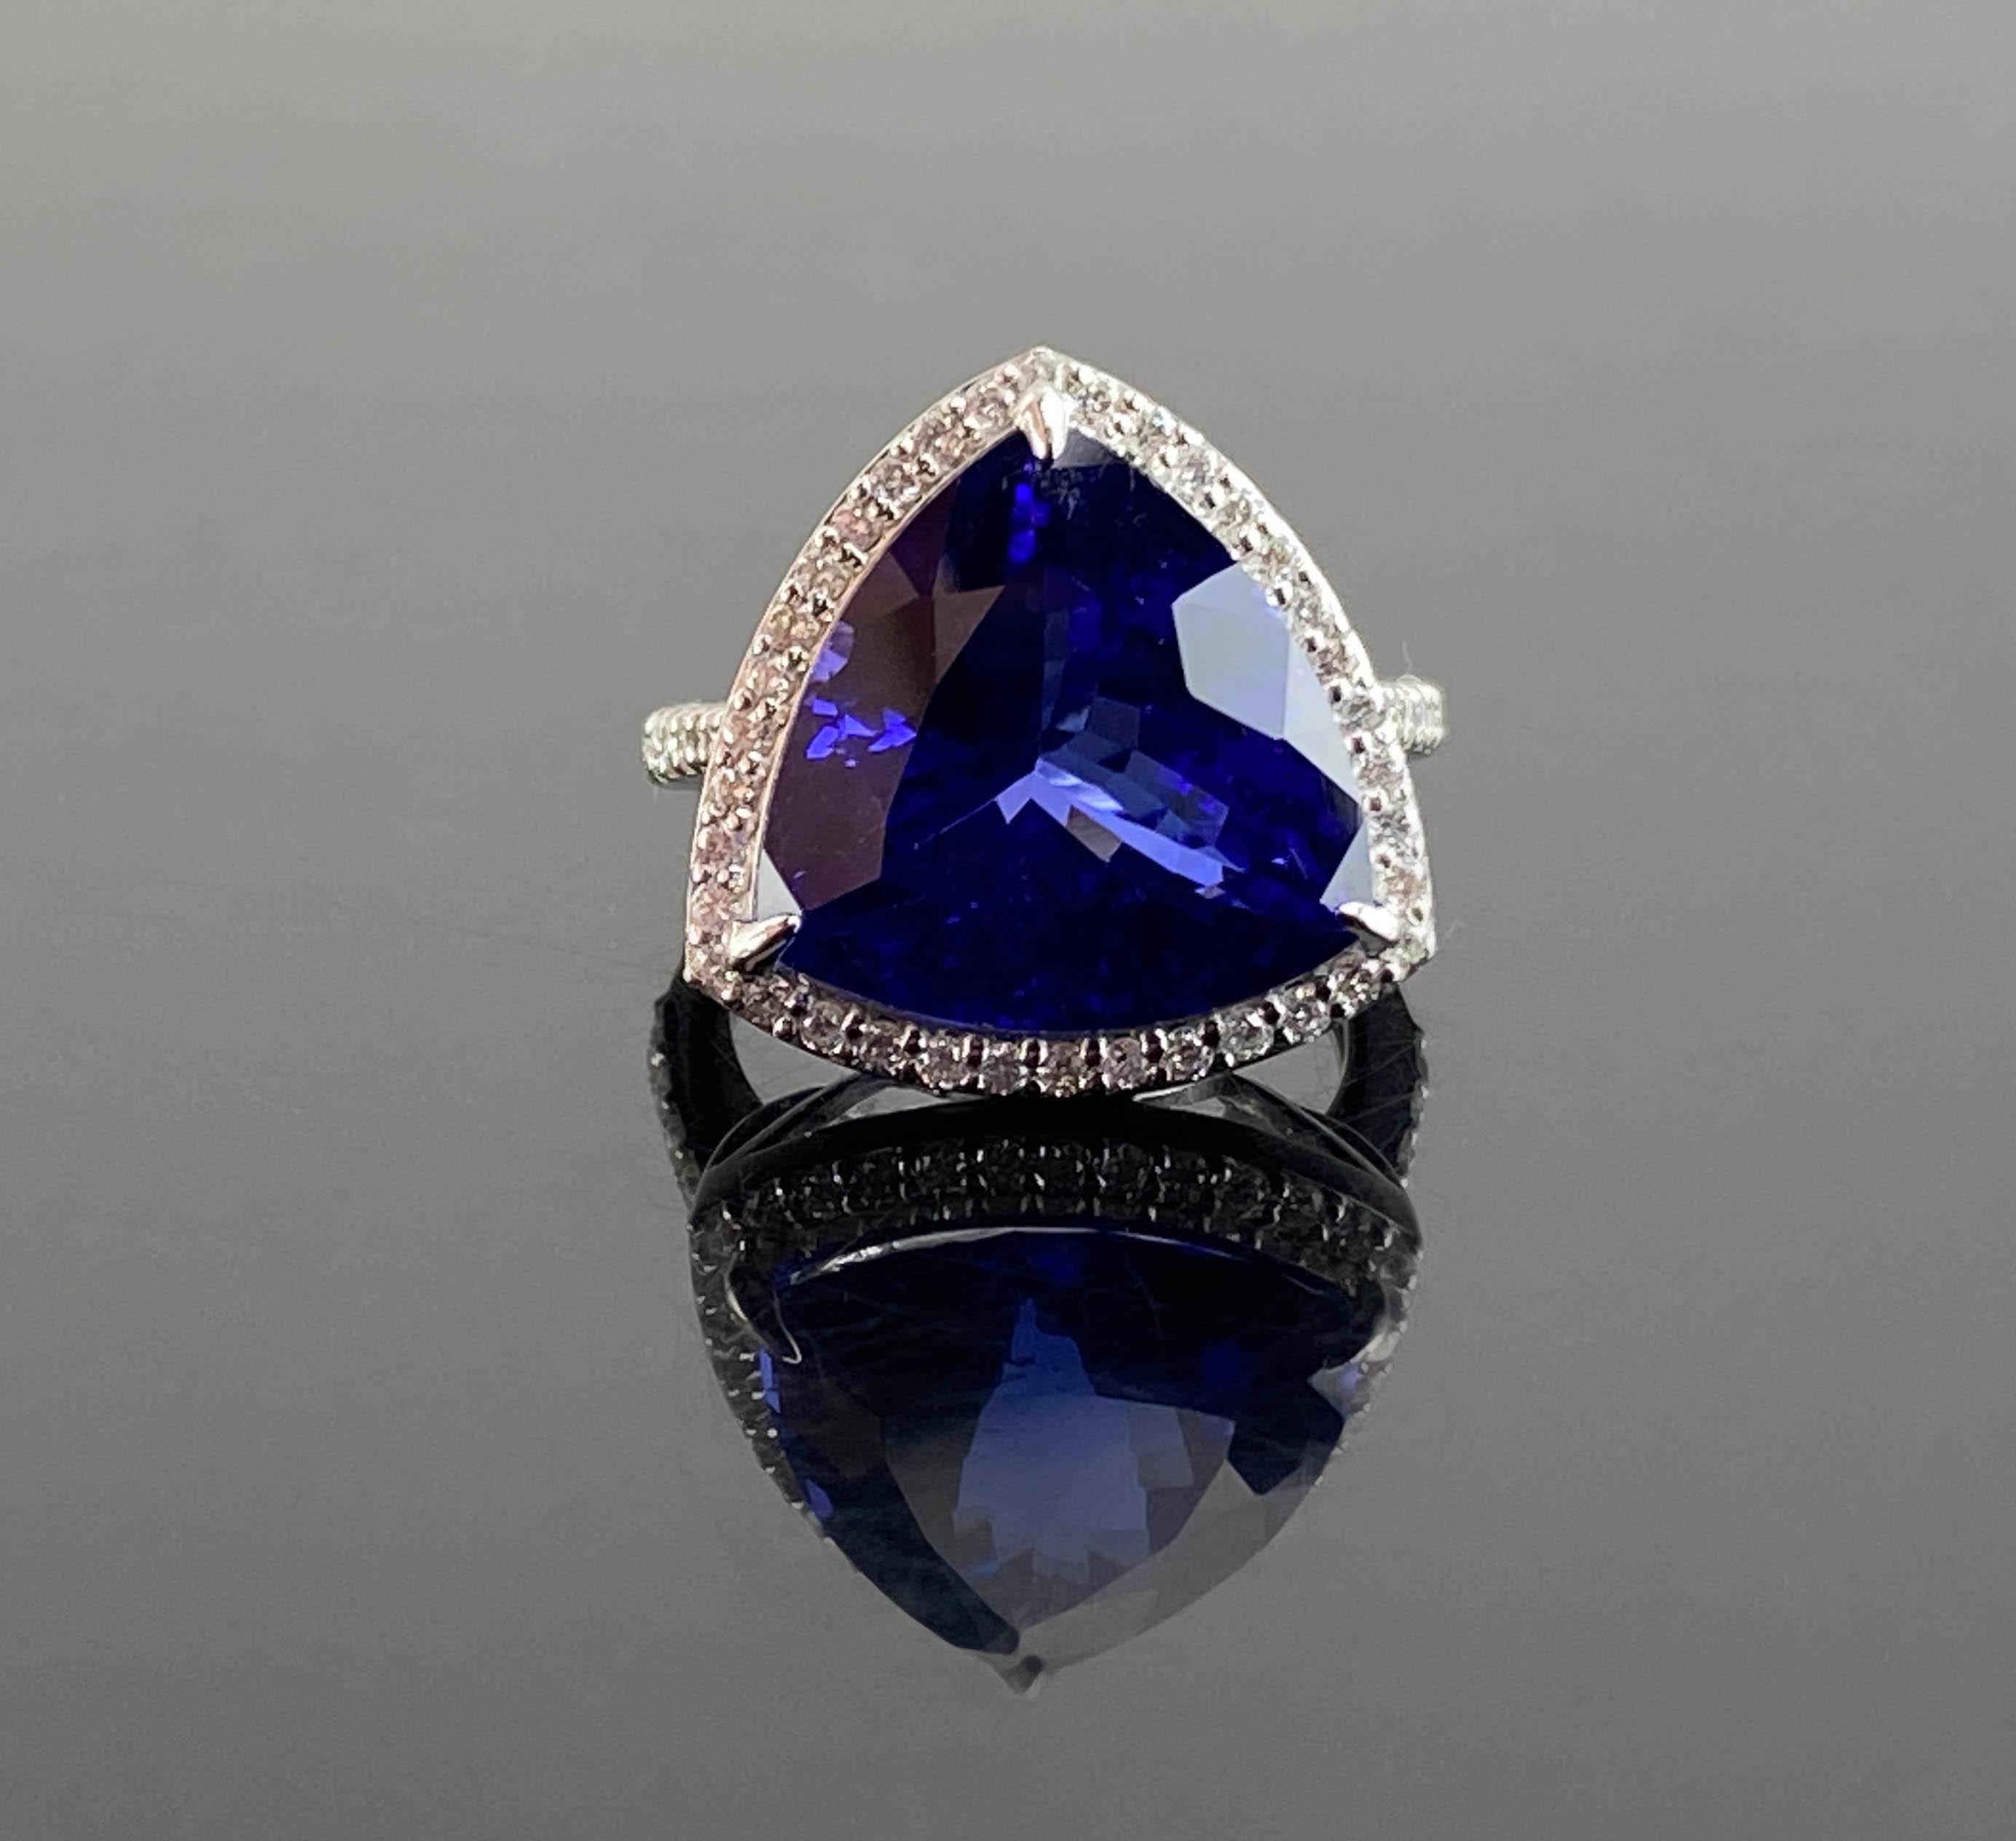 12.54 Carat Trillion Cut Tanzanite and Diamond Cocktail Ring Set in White Gold For Sale 3